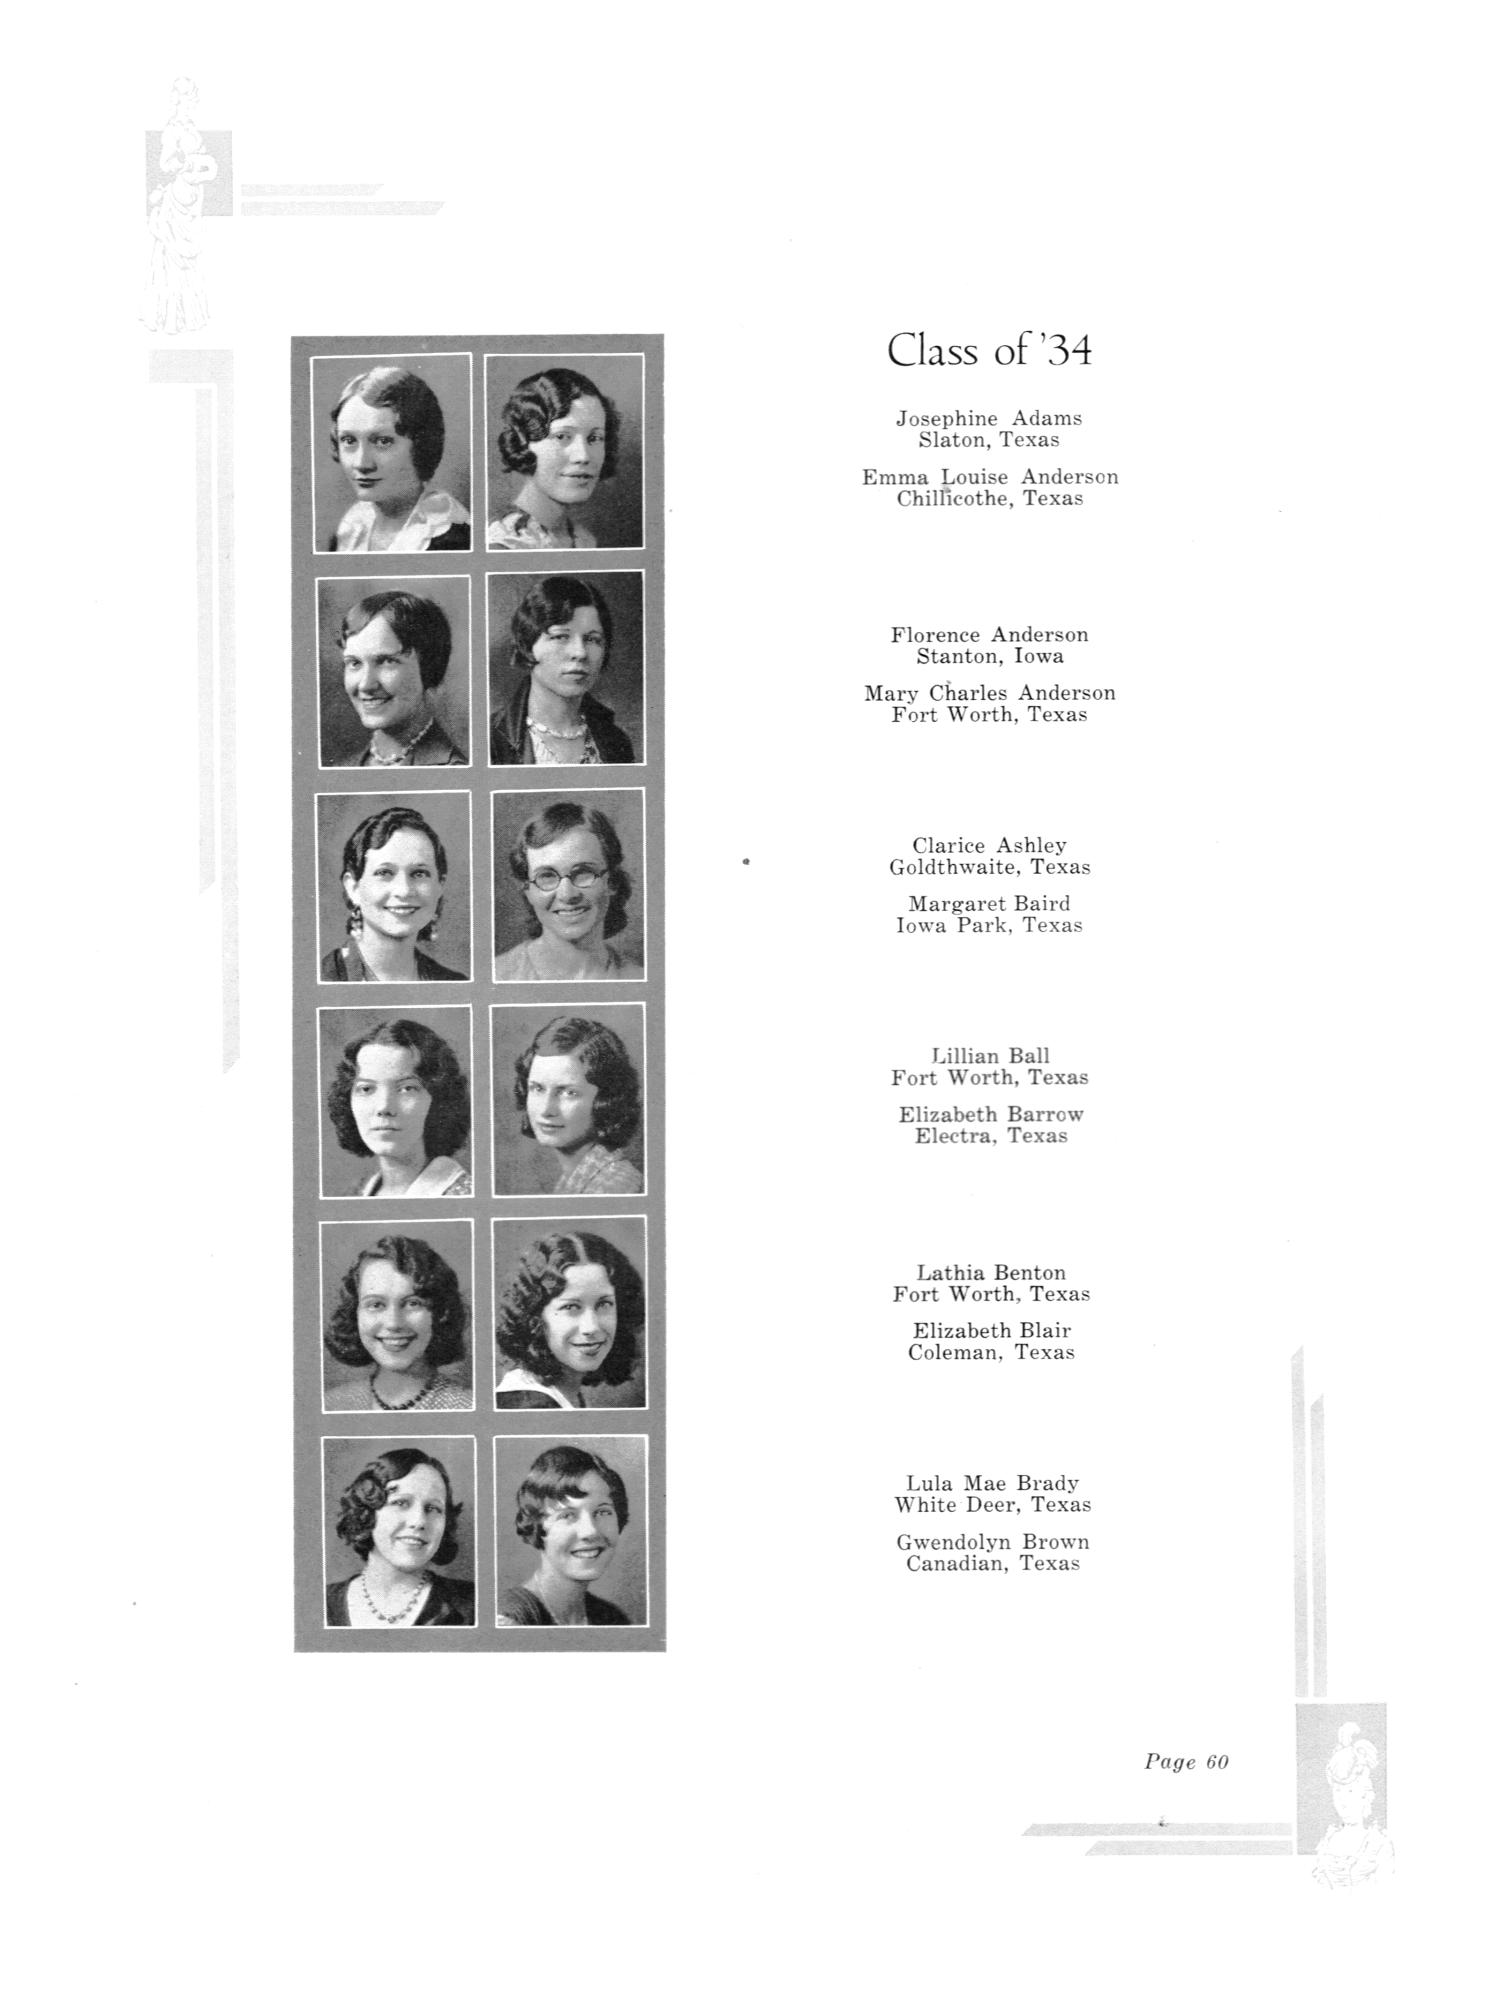 TXWOCO, Yearbook of Texas Woman's College, 1931
                                                
                                                    60
                                                